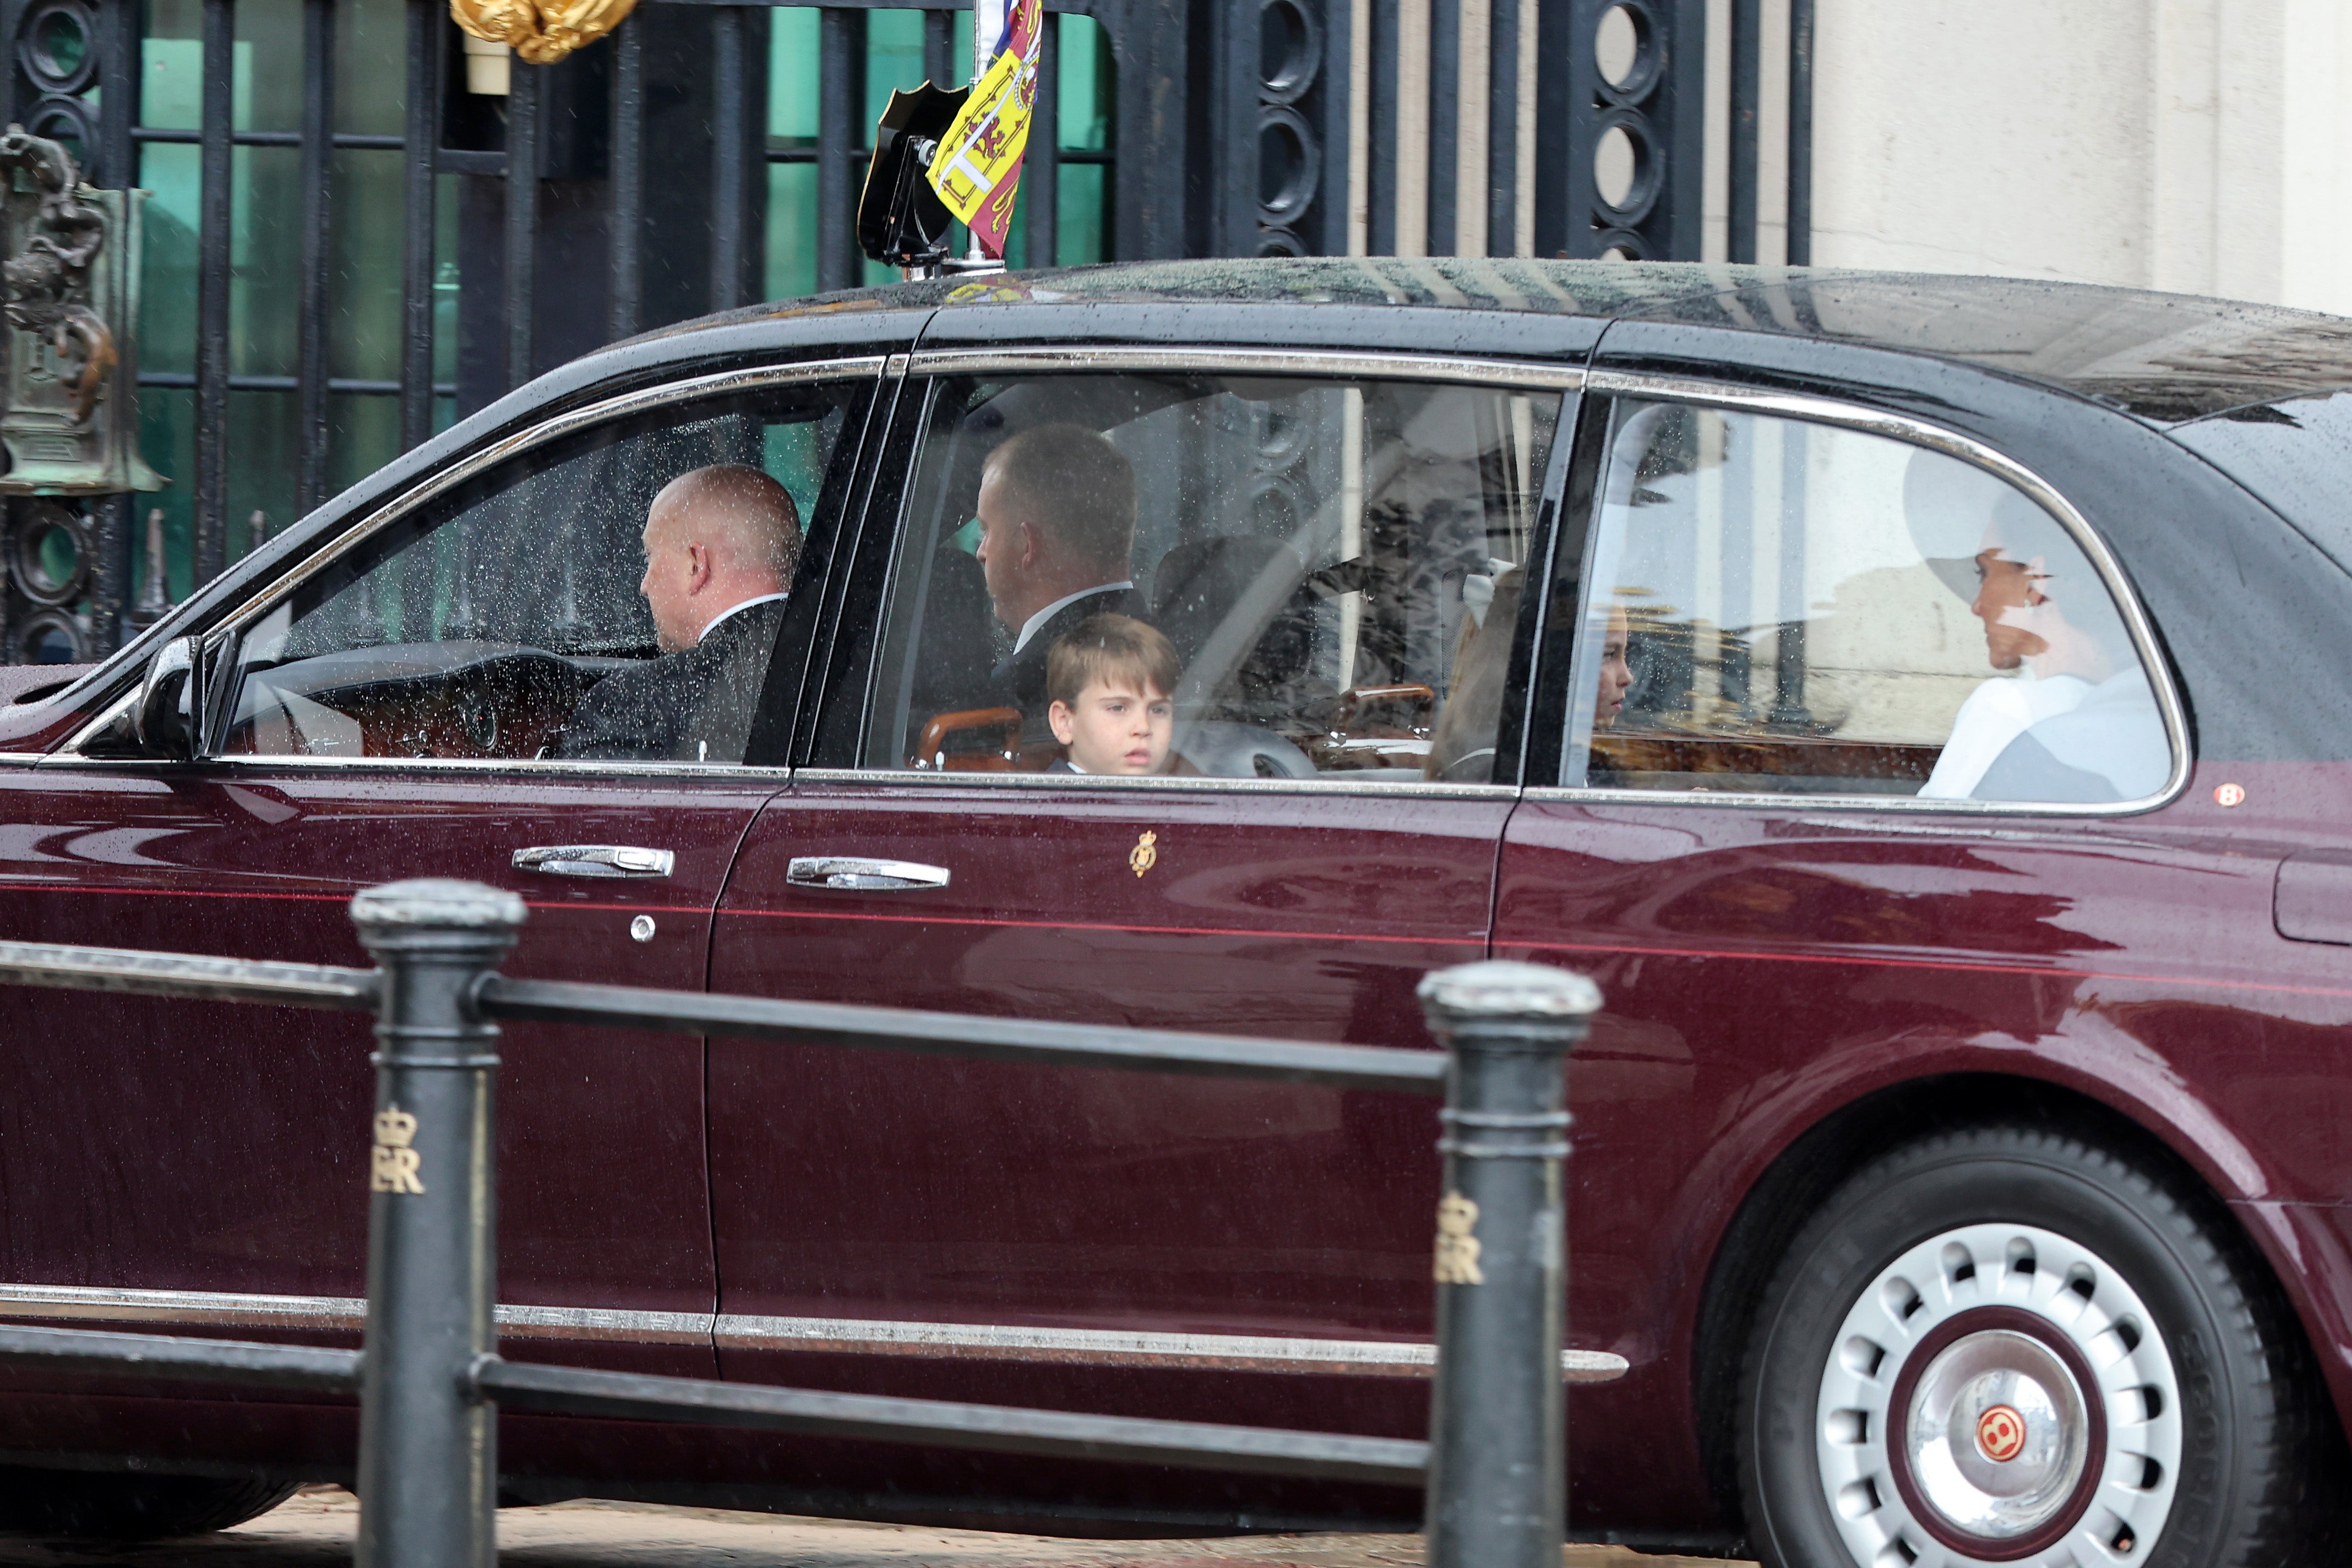 Prince Louis was also seen alongside his brothers